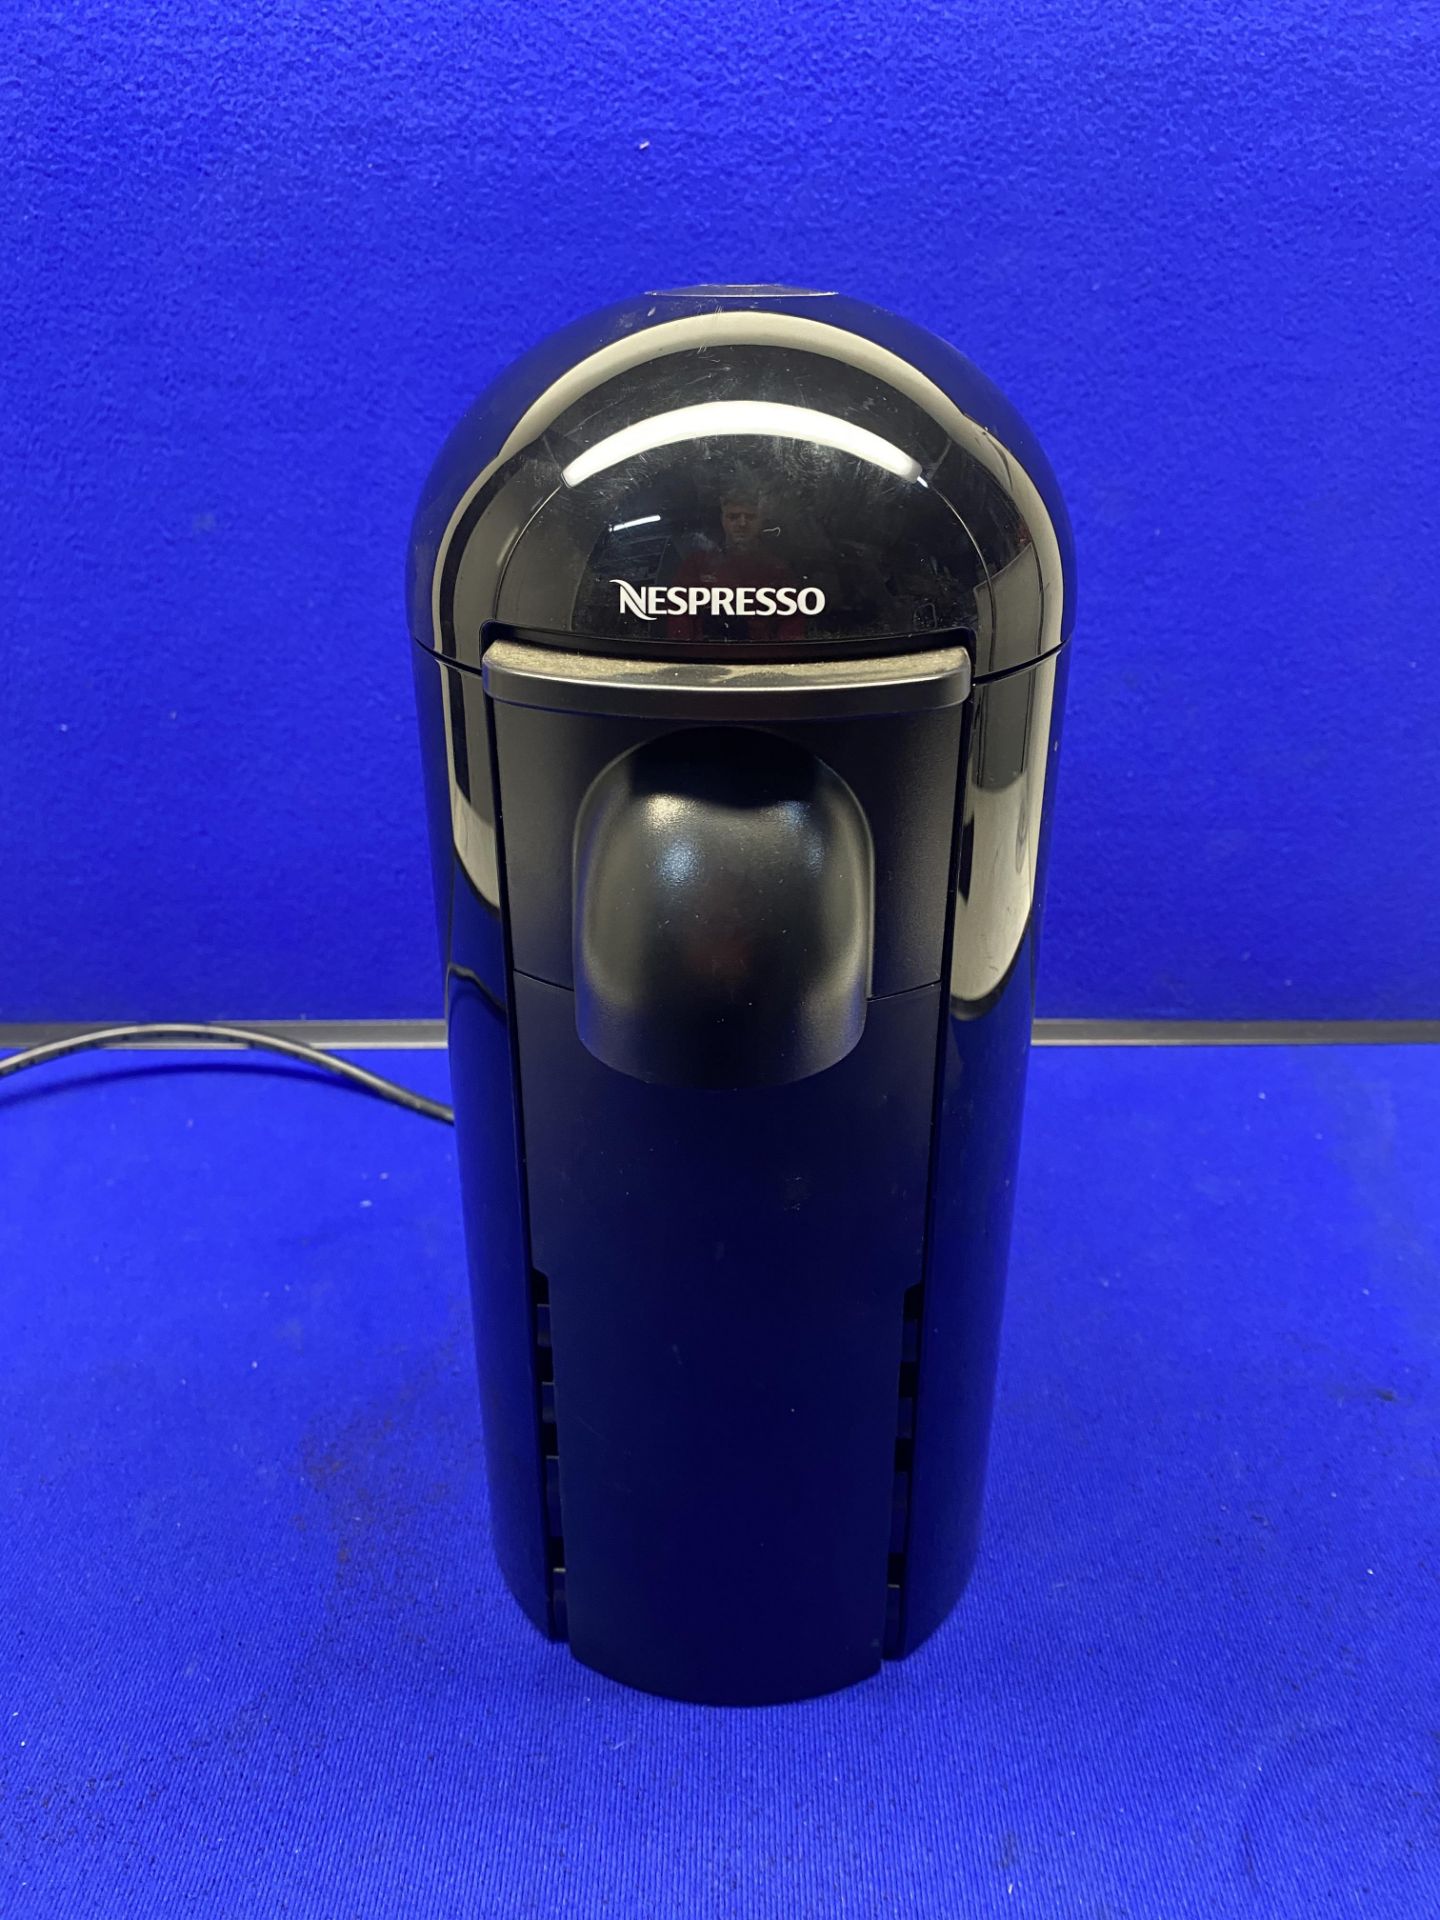 4 x Nespresso Coffee Machines As Seen In Photos - Image 11 of 12